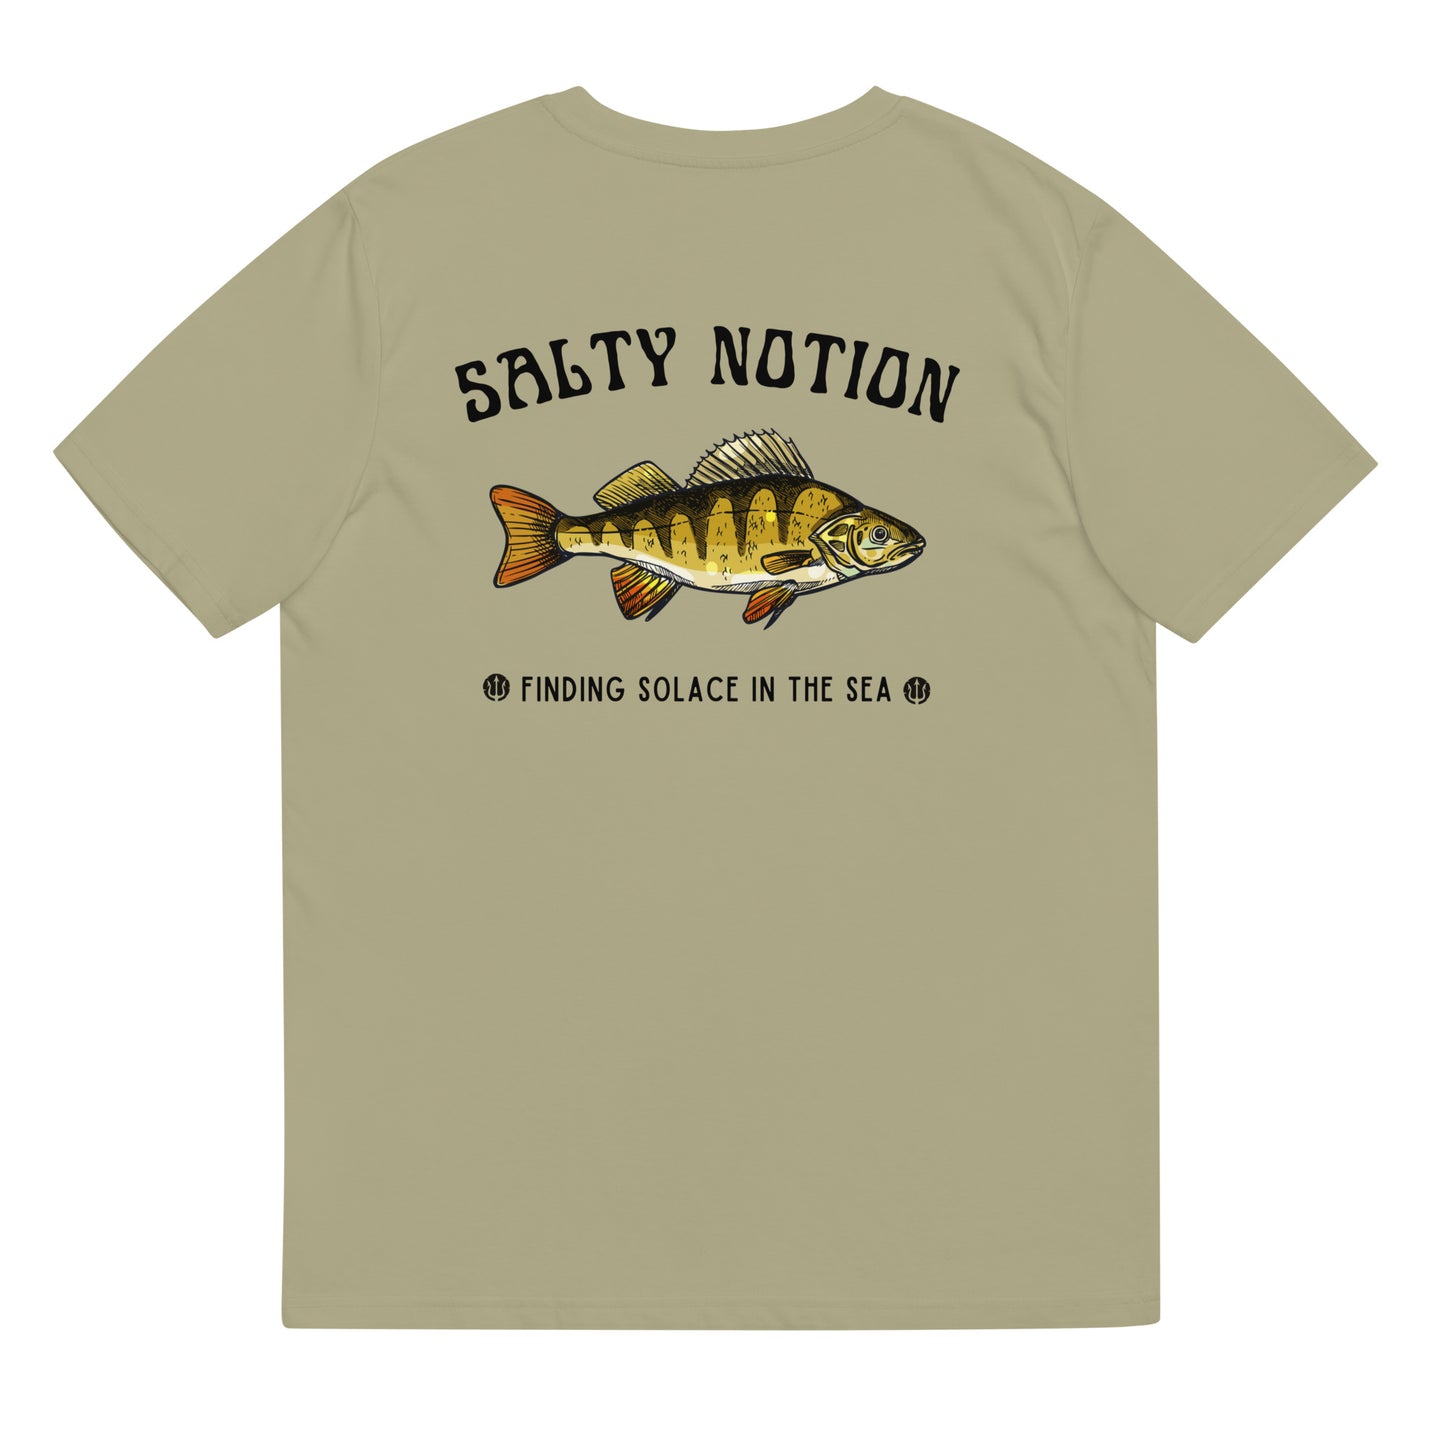 Find solace in the sea organic cotton t-shirt